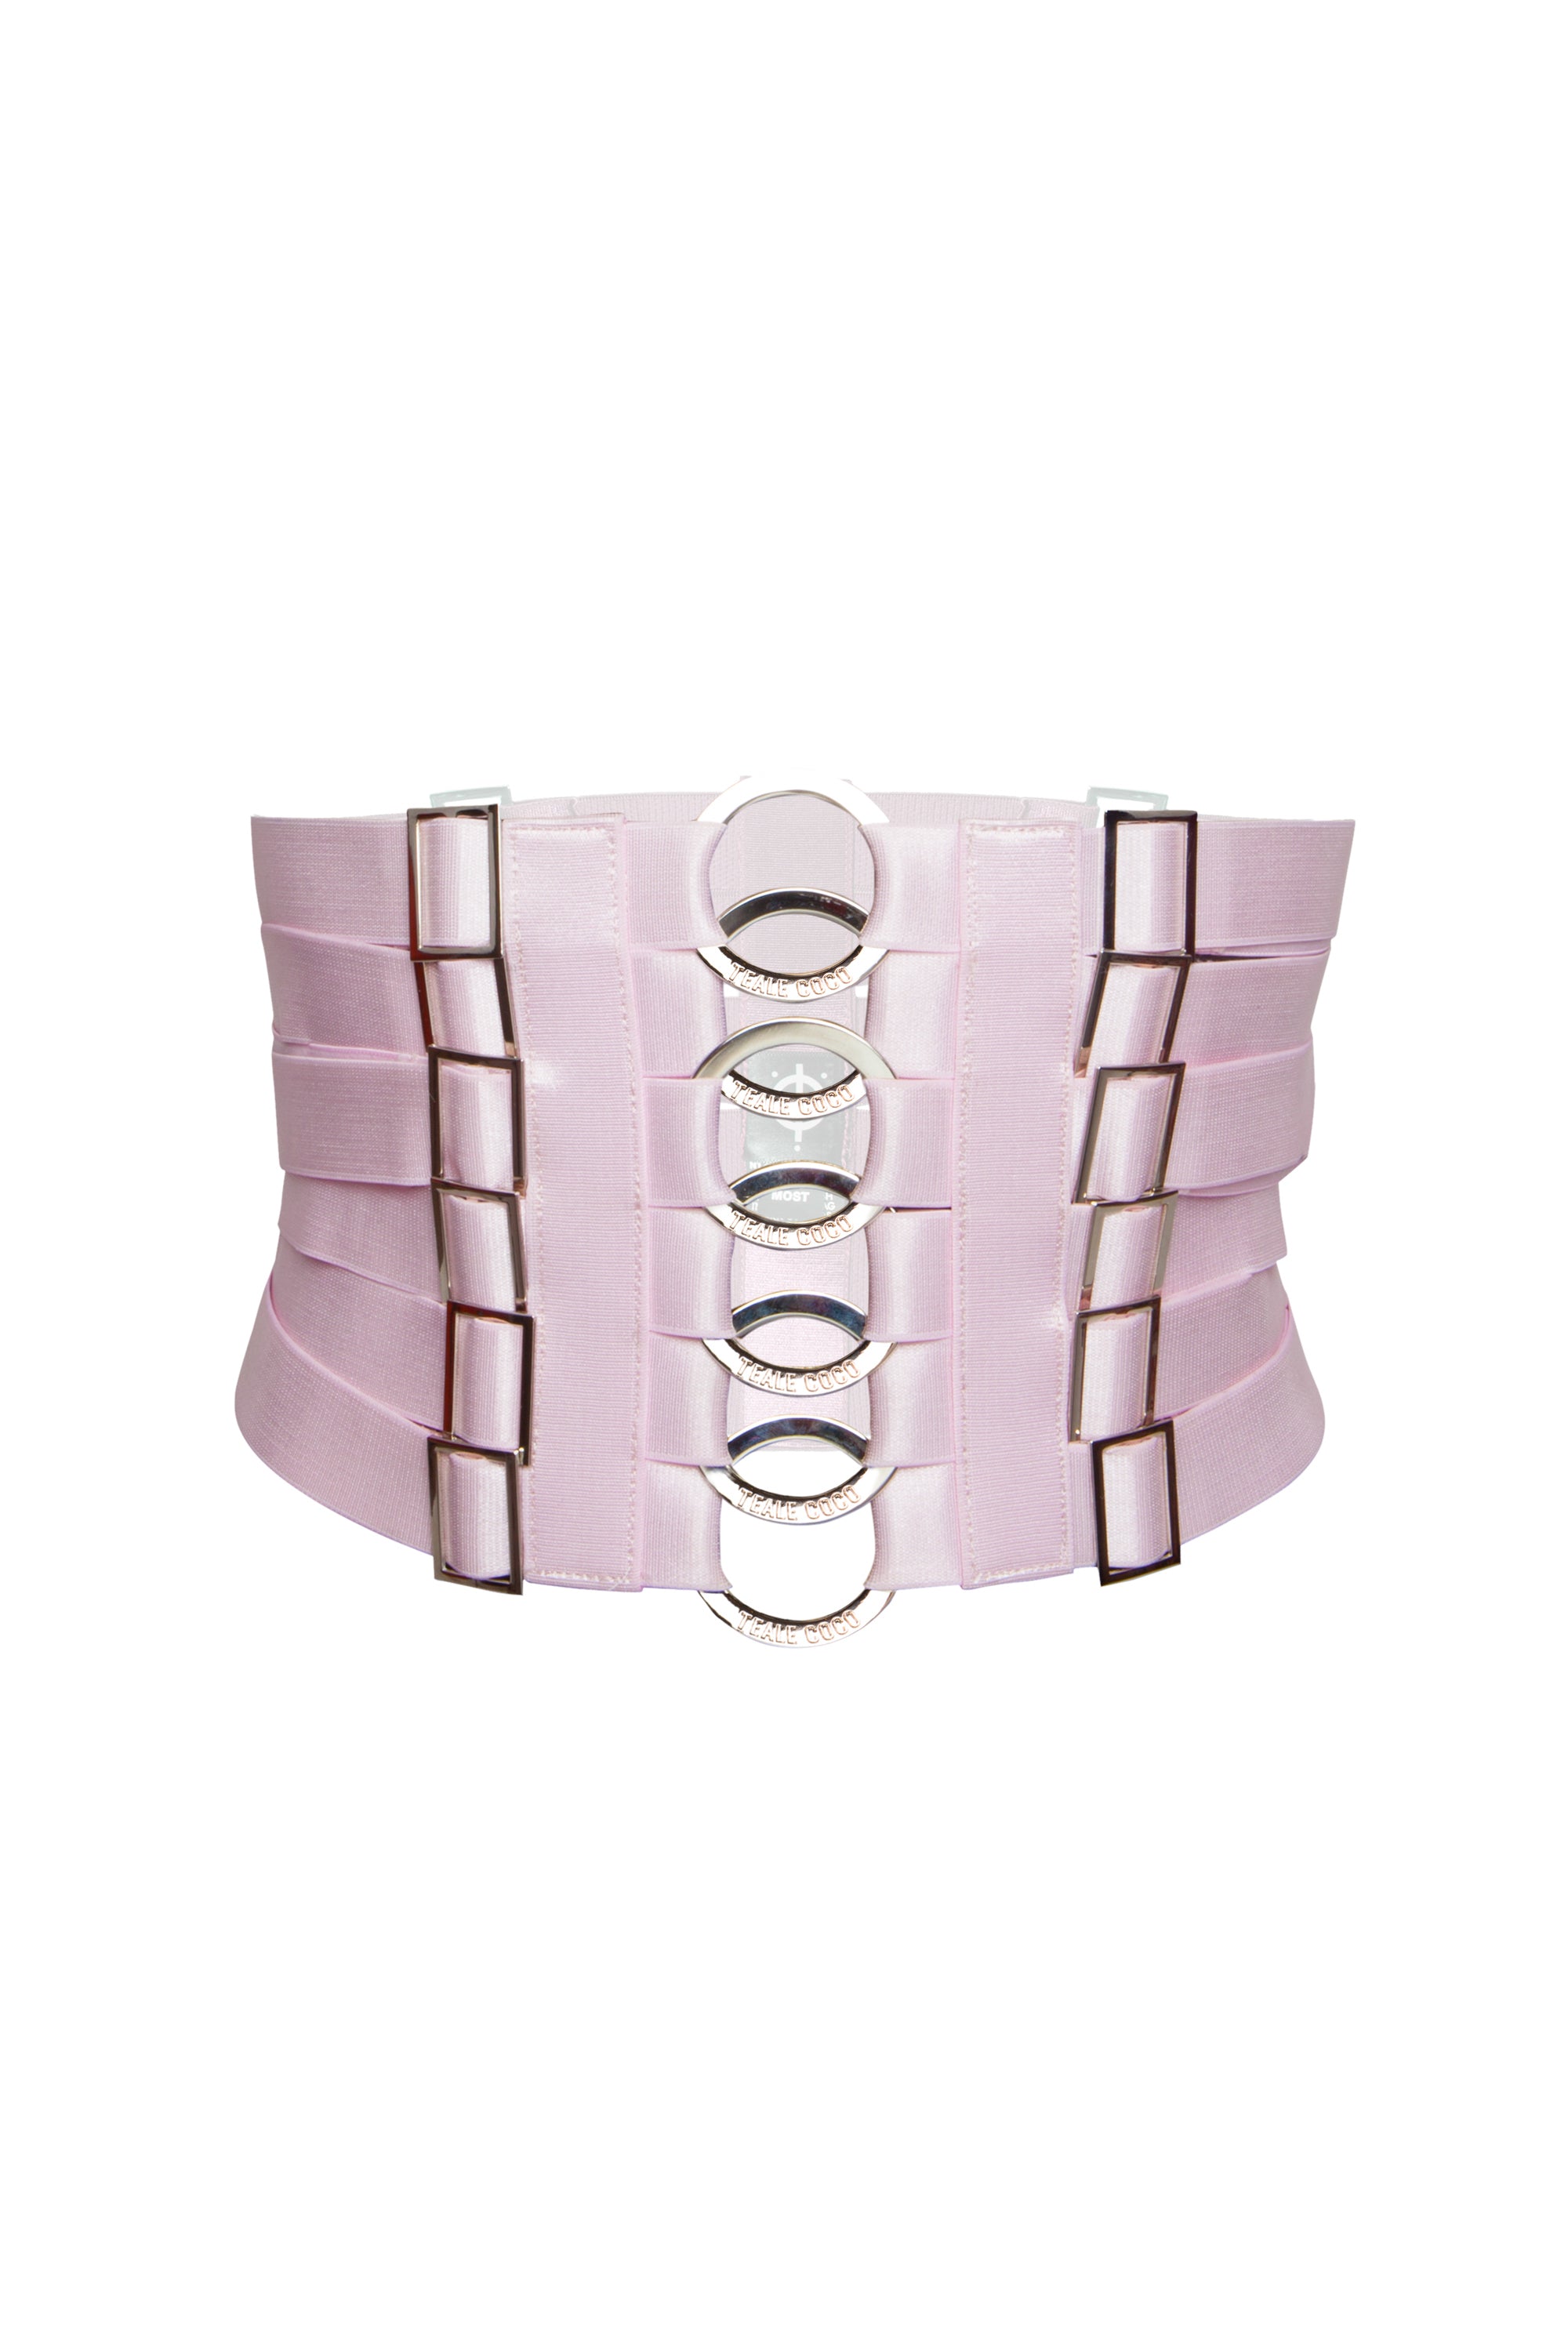 Corset Harness Dusted Pink By Teale Coco Tealecoco